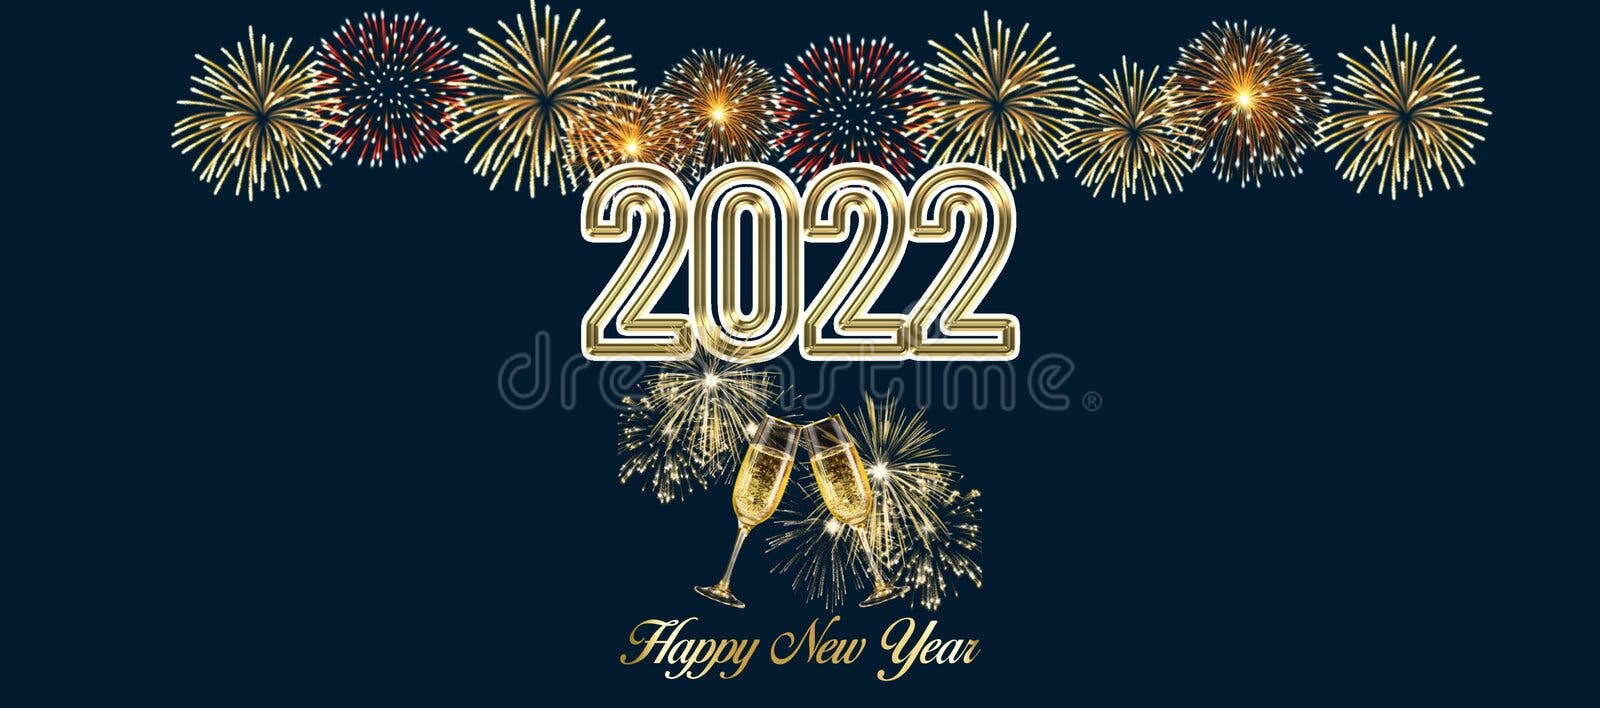 Happy New Year 2022 Image & Photo (Free Trial)